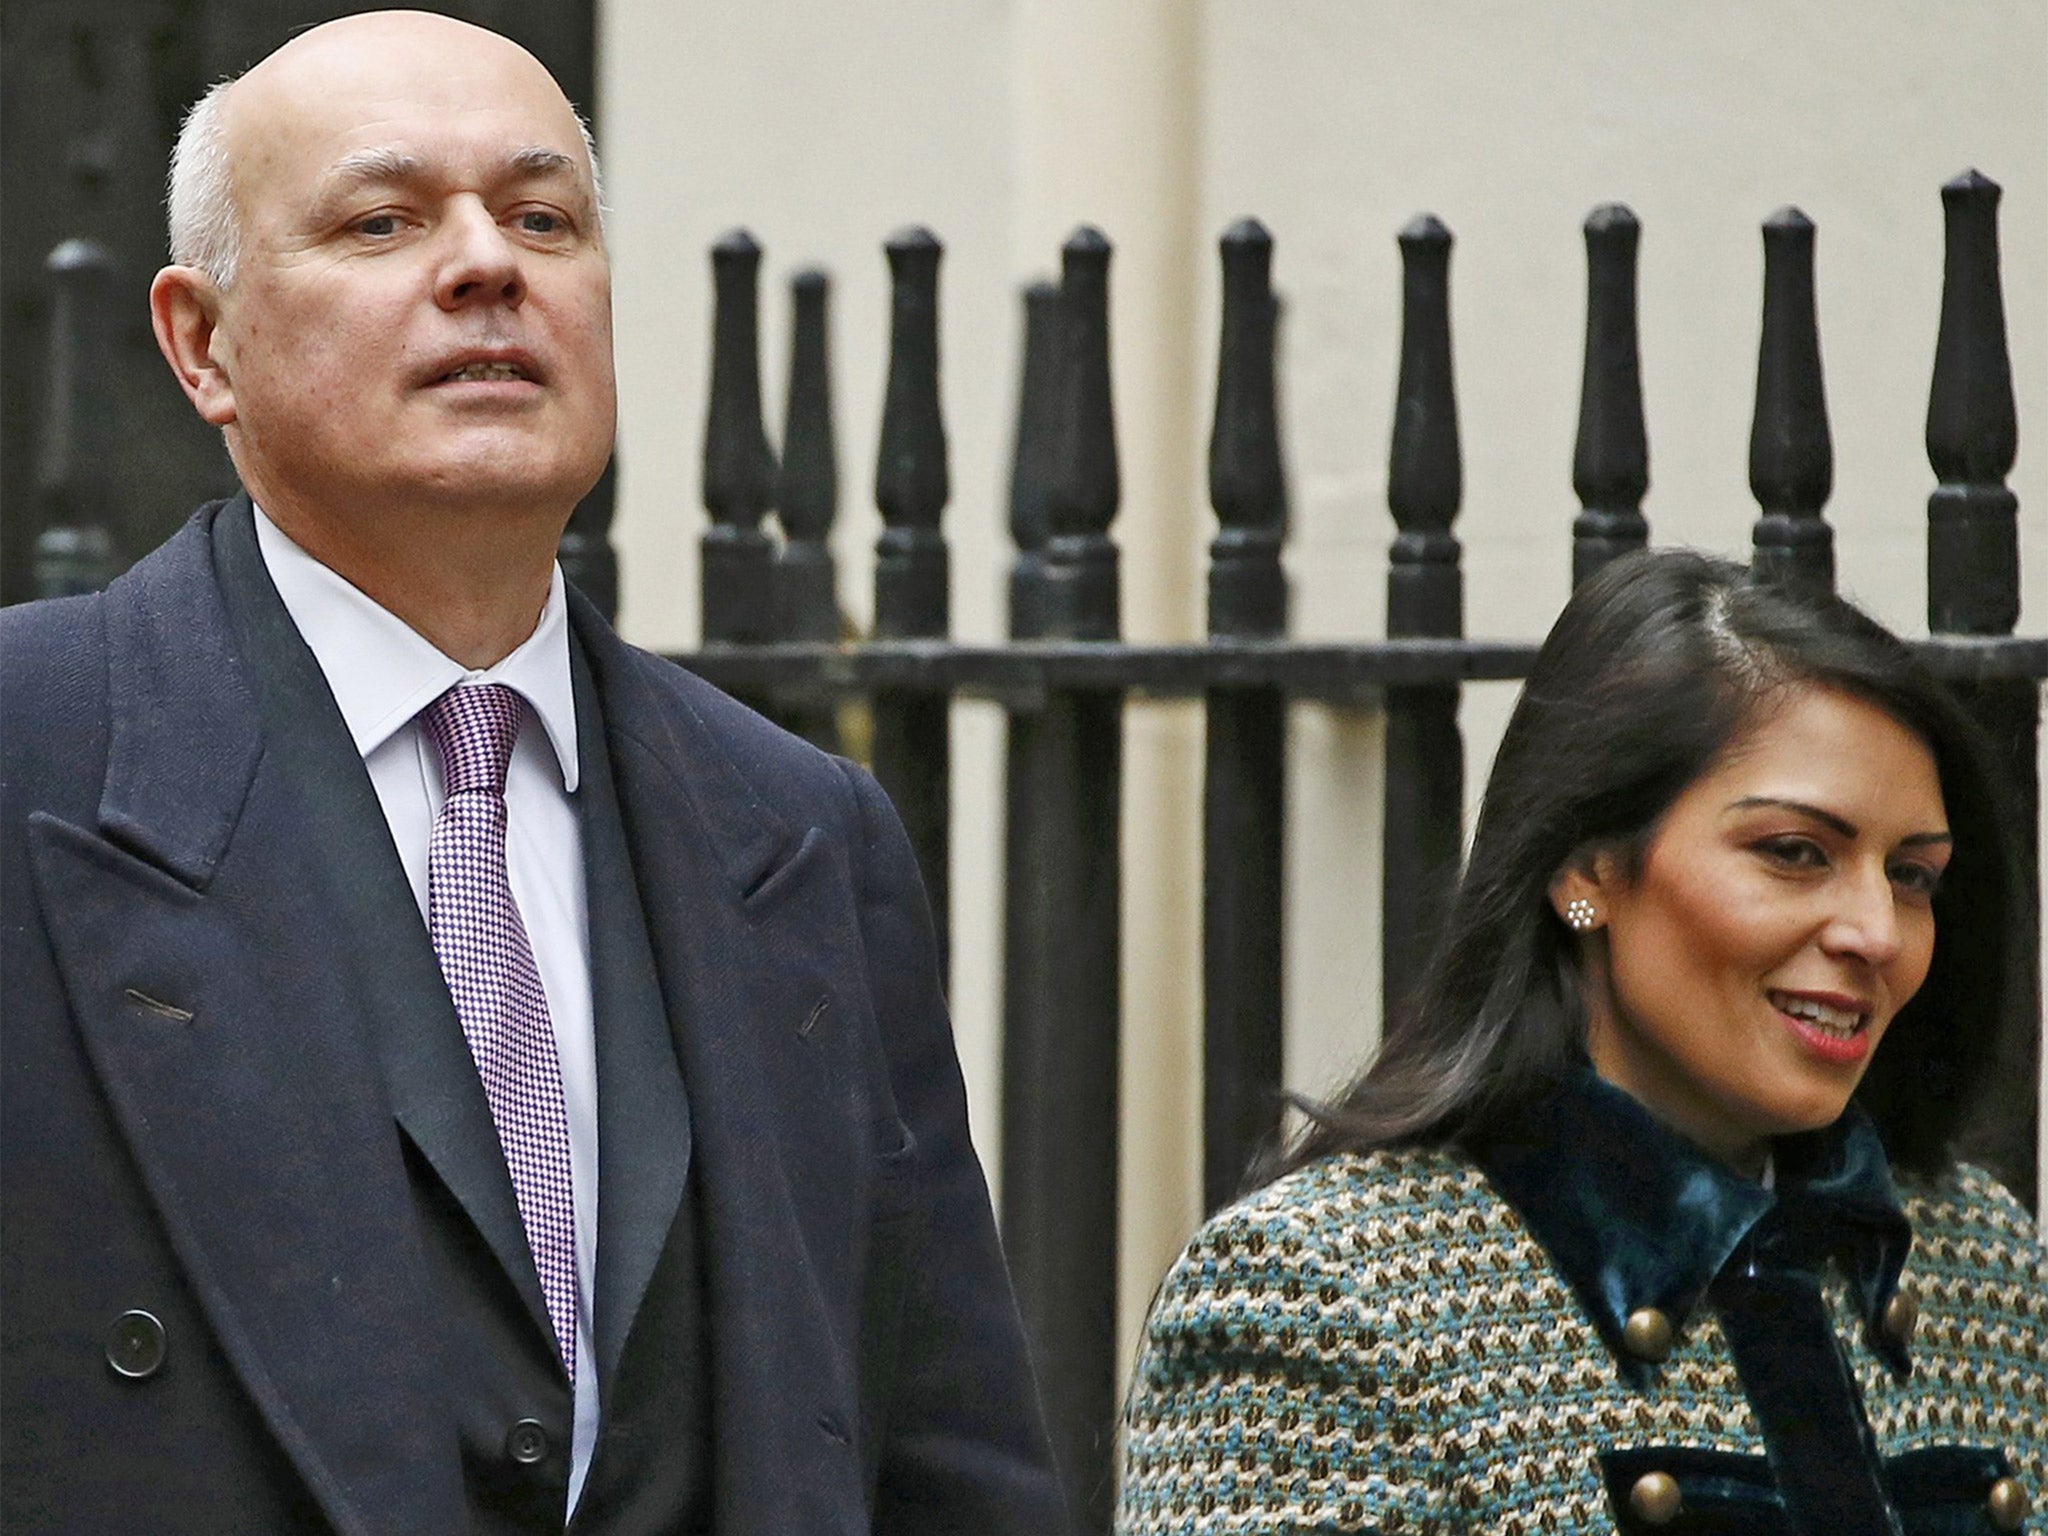 Out campaigners Iain Duncan Smith and Priti Patel arrive to attend a cabinet meeting at Number 10 Downing Street on Tuesday